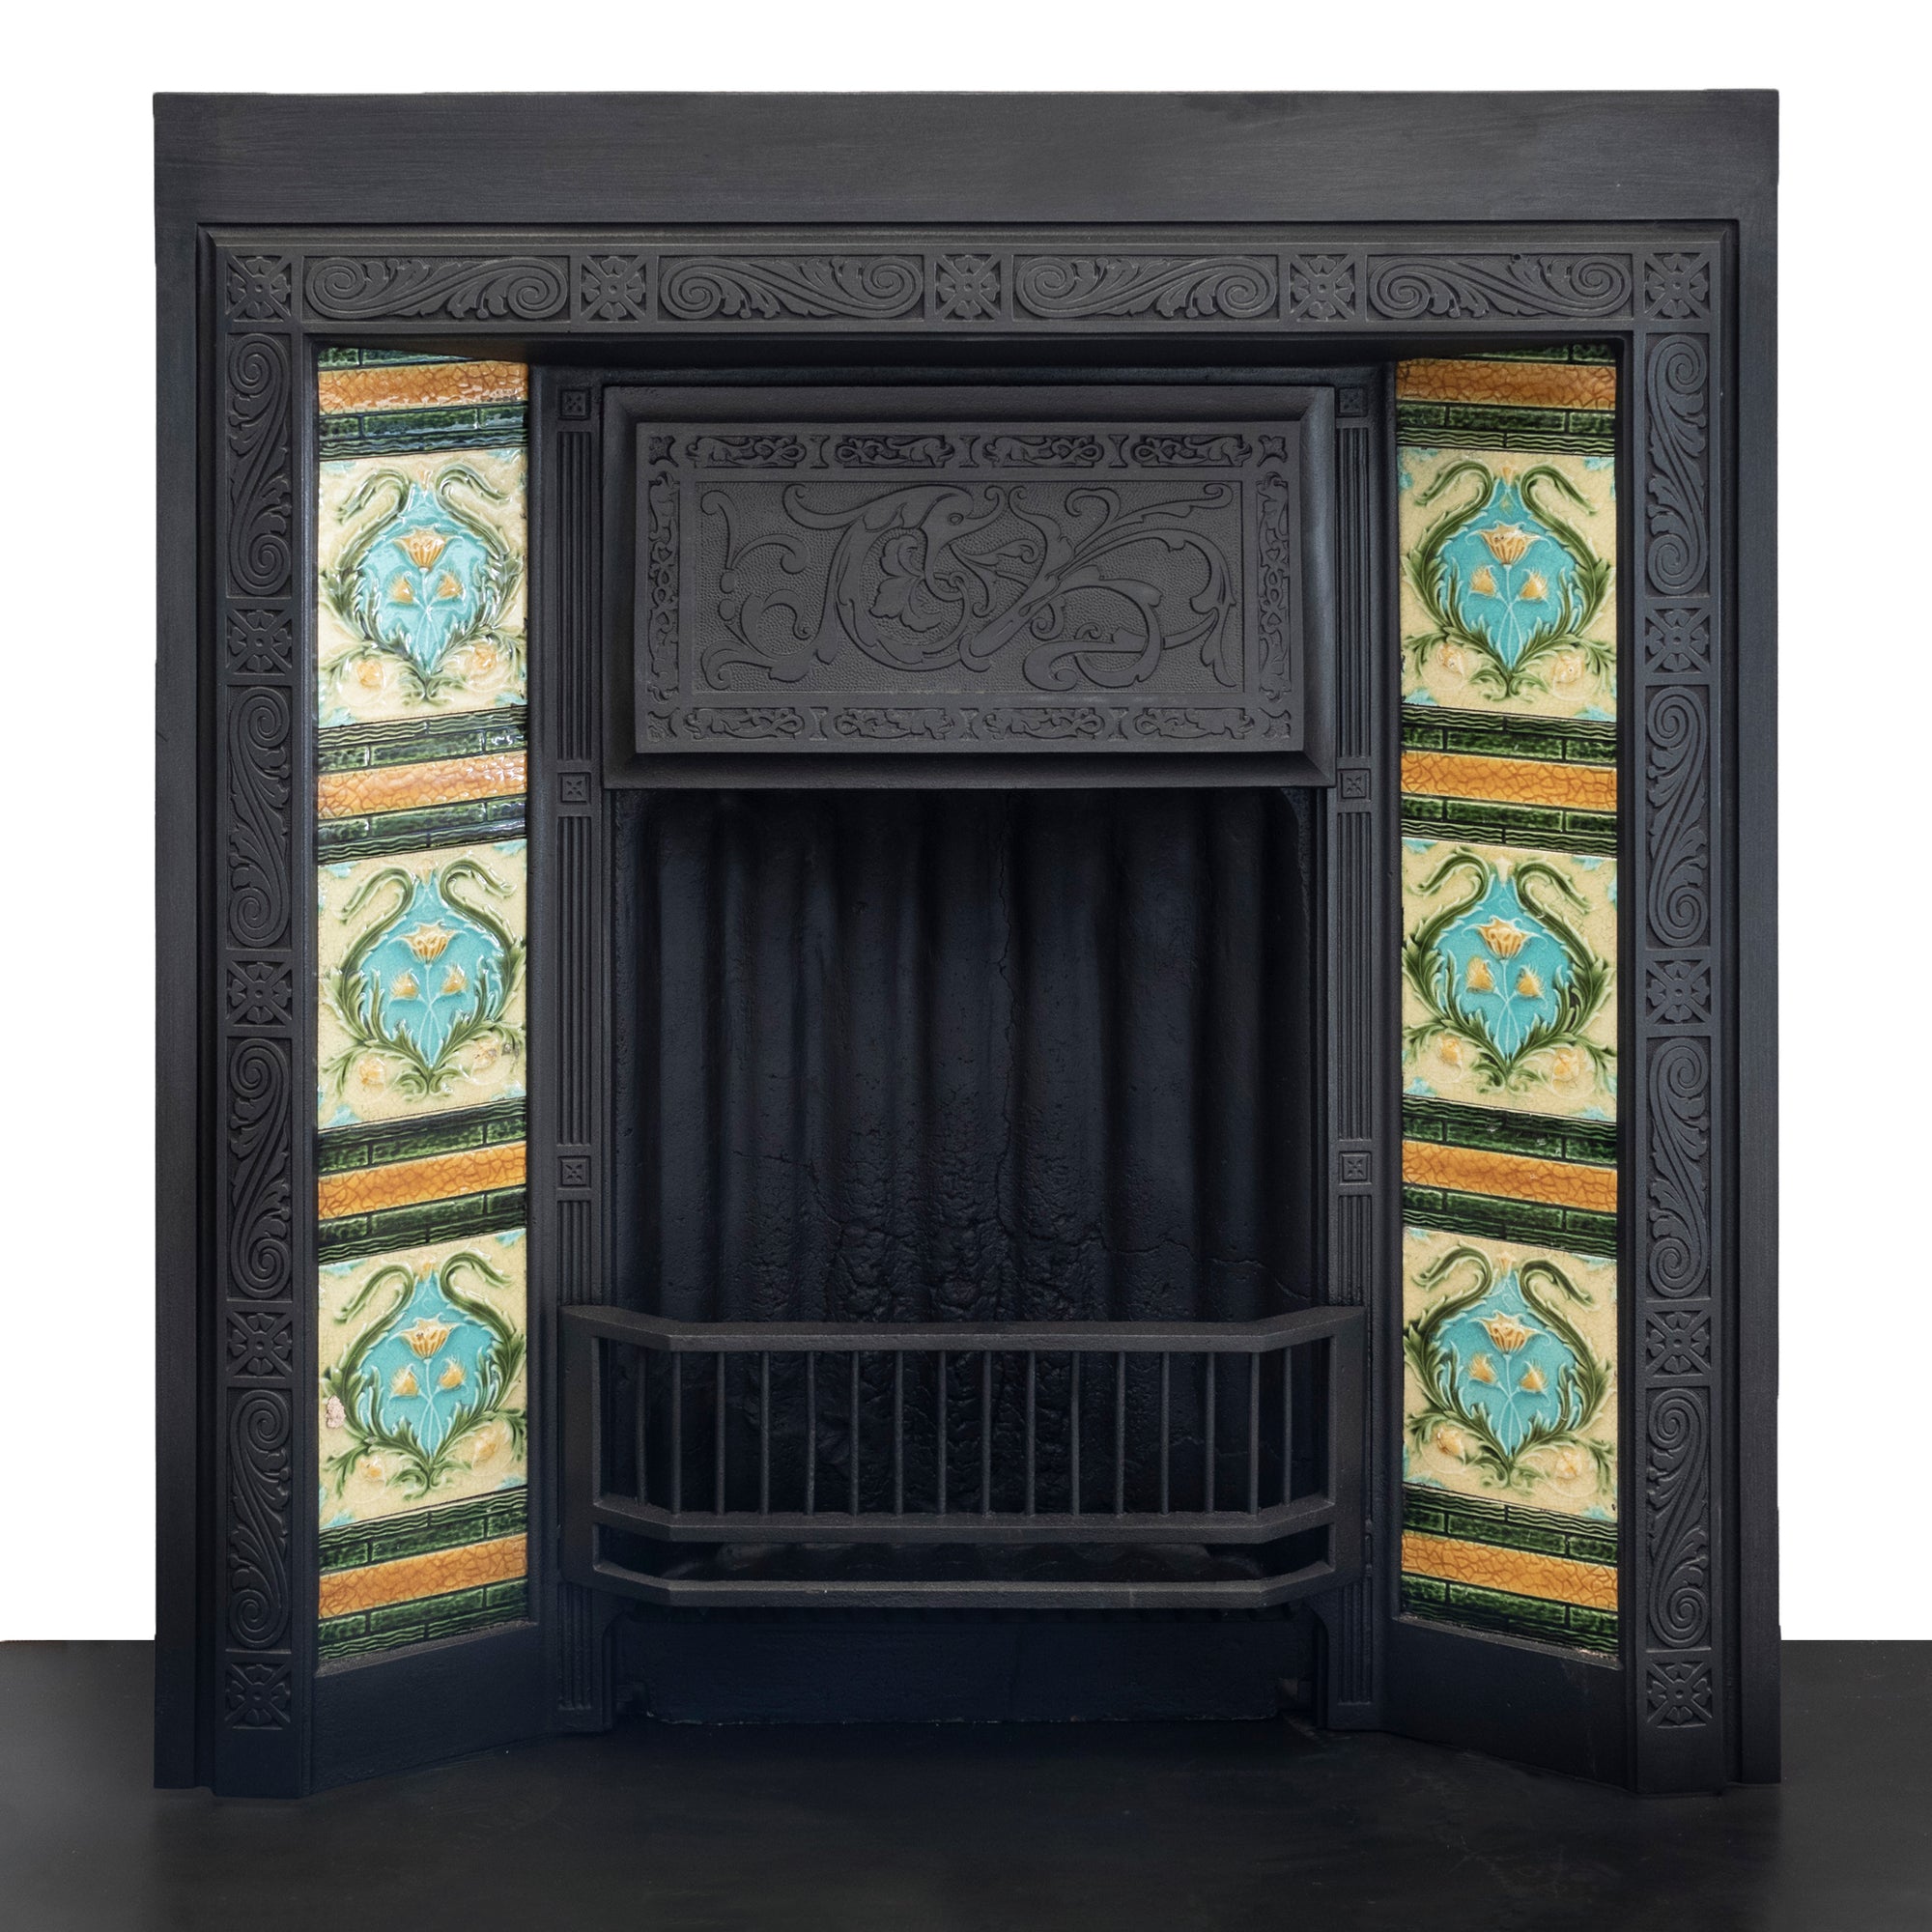 Antique Cast iron Fireplace Insert with Green & Blue Tiles | The Architectural Forum